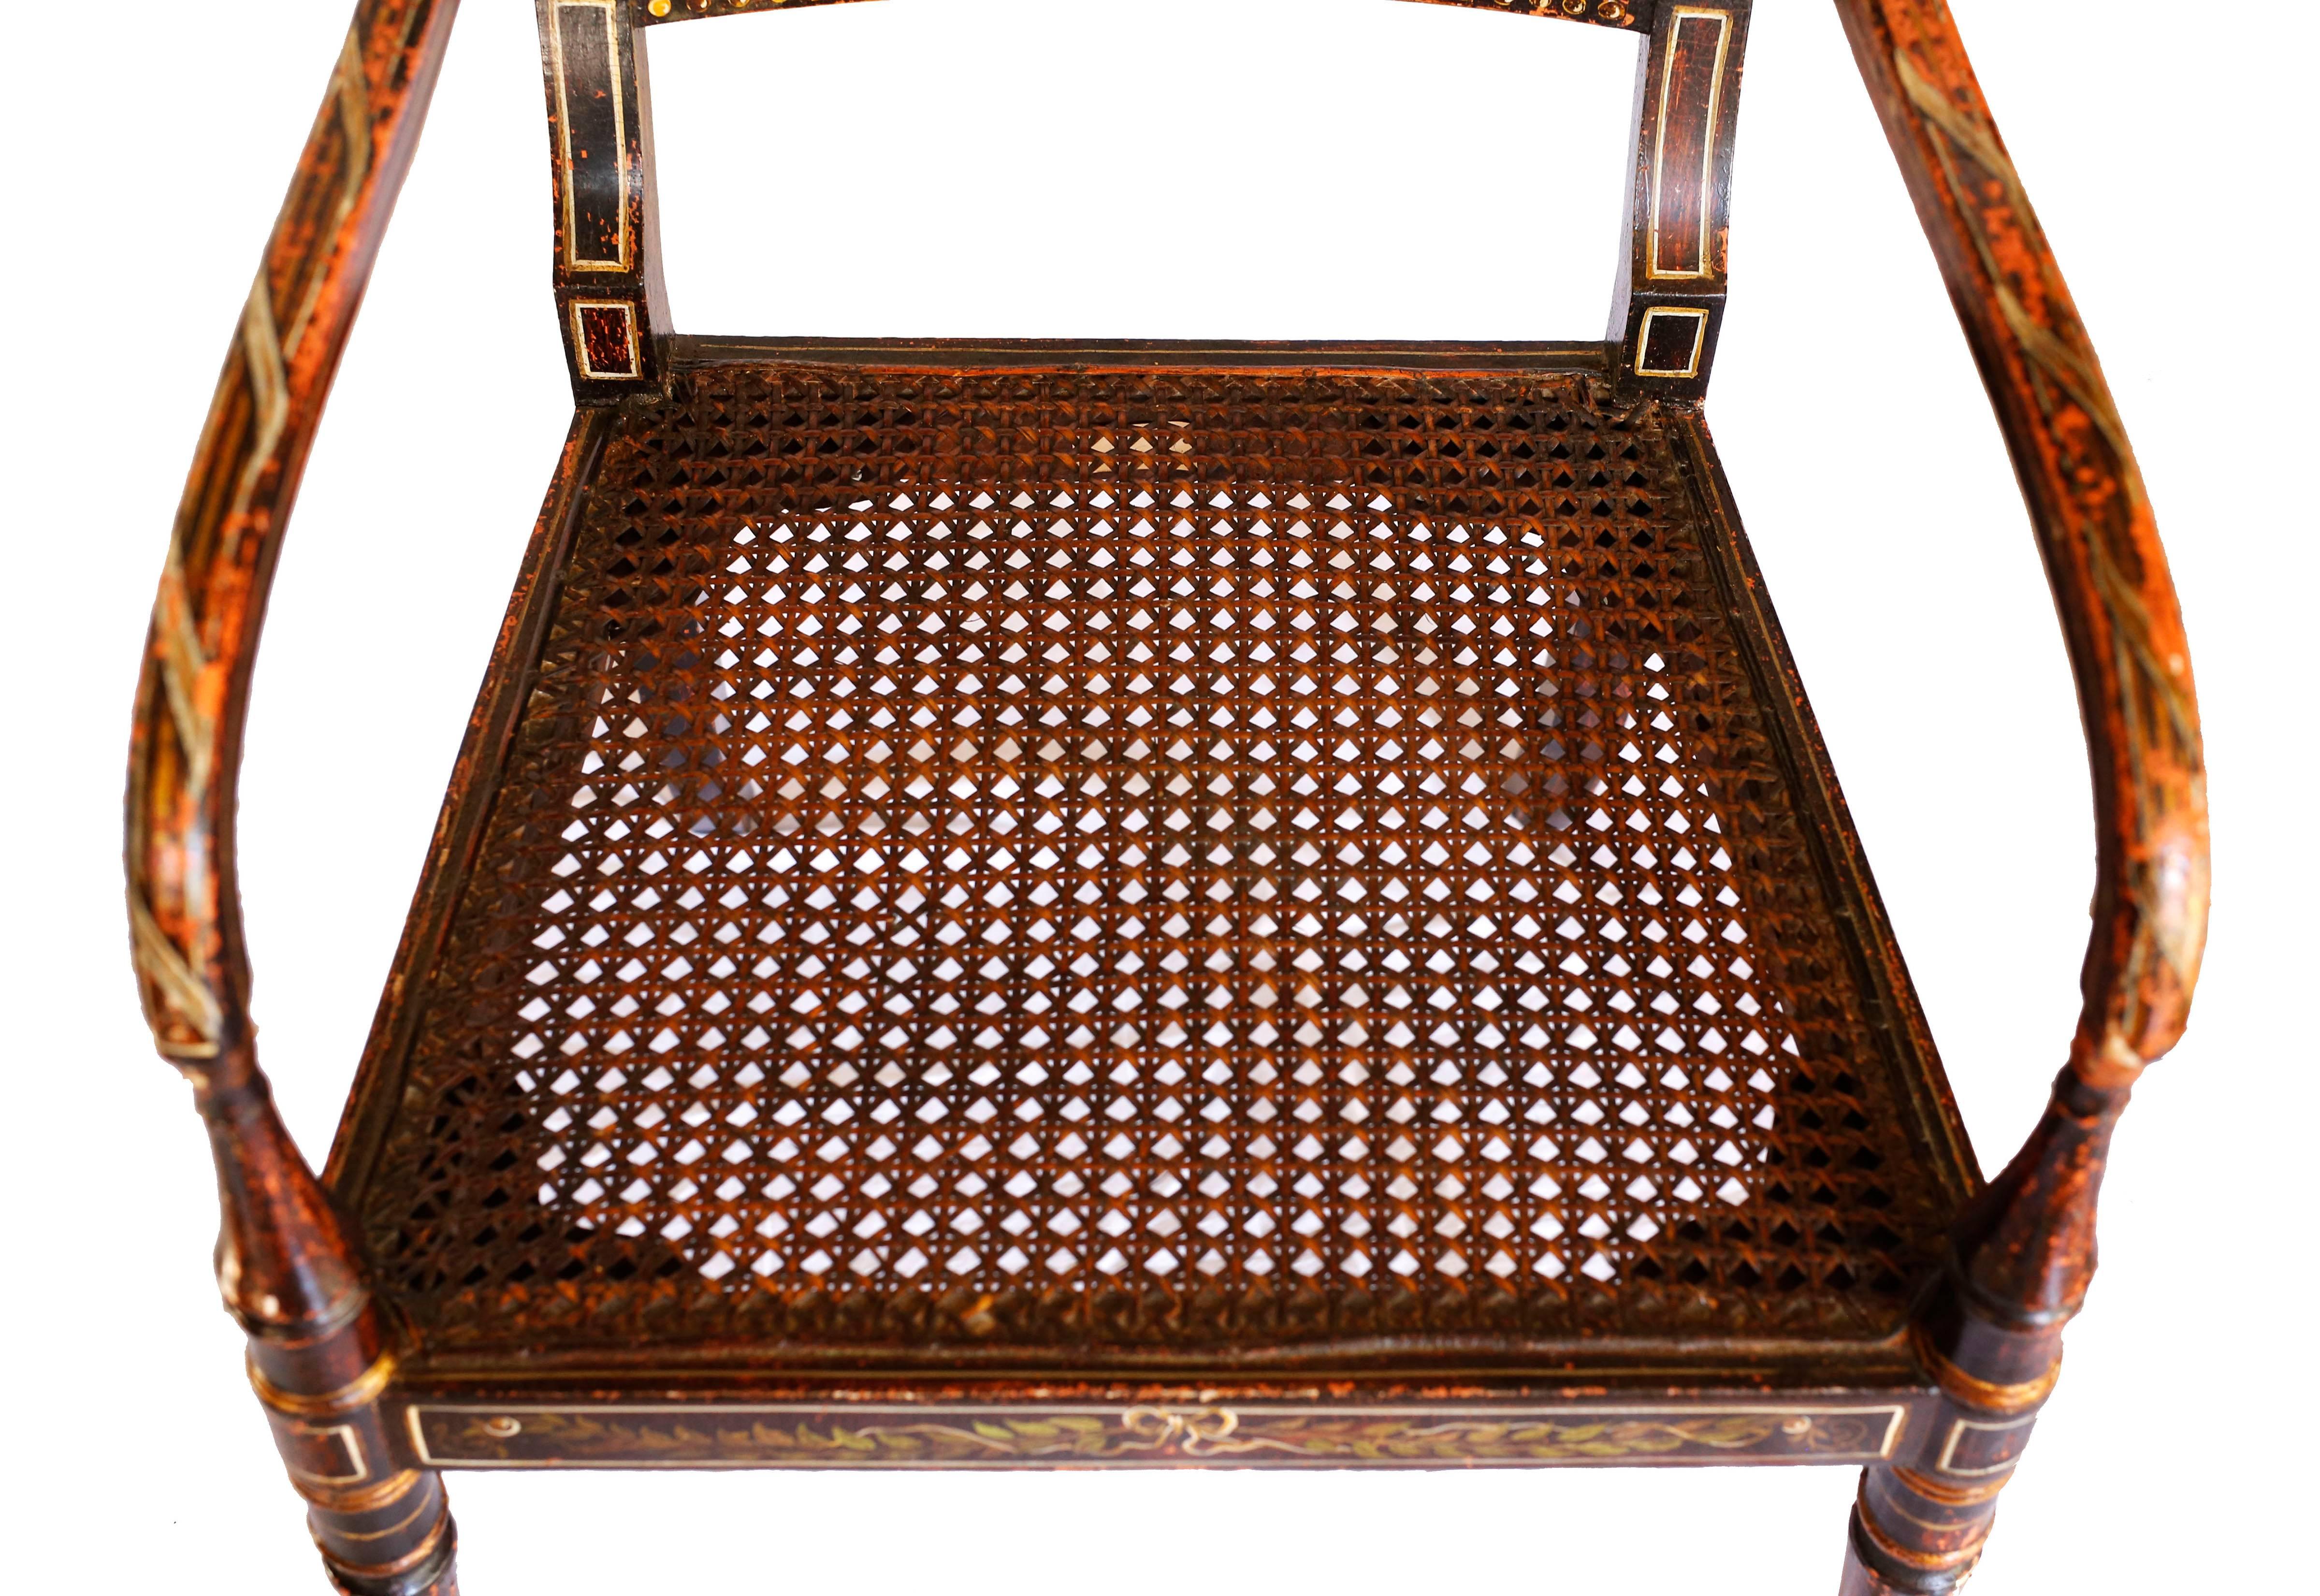 Early 19th Century Parcel-Gilt Caned Armchair, after Angelica Kauffman 1